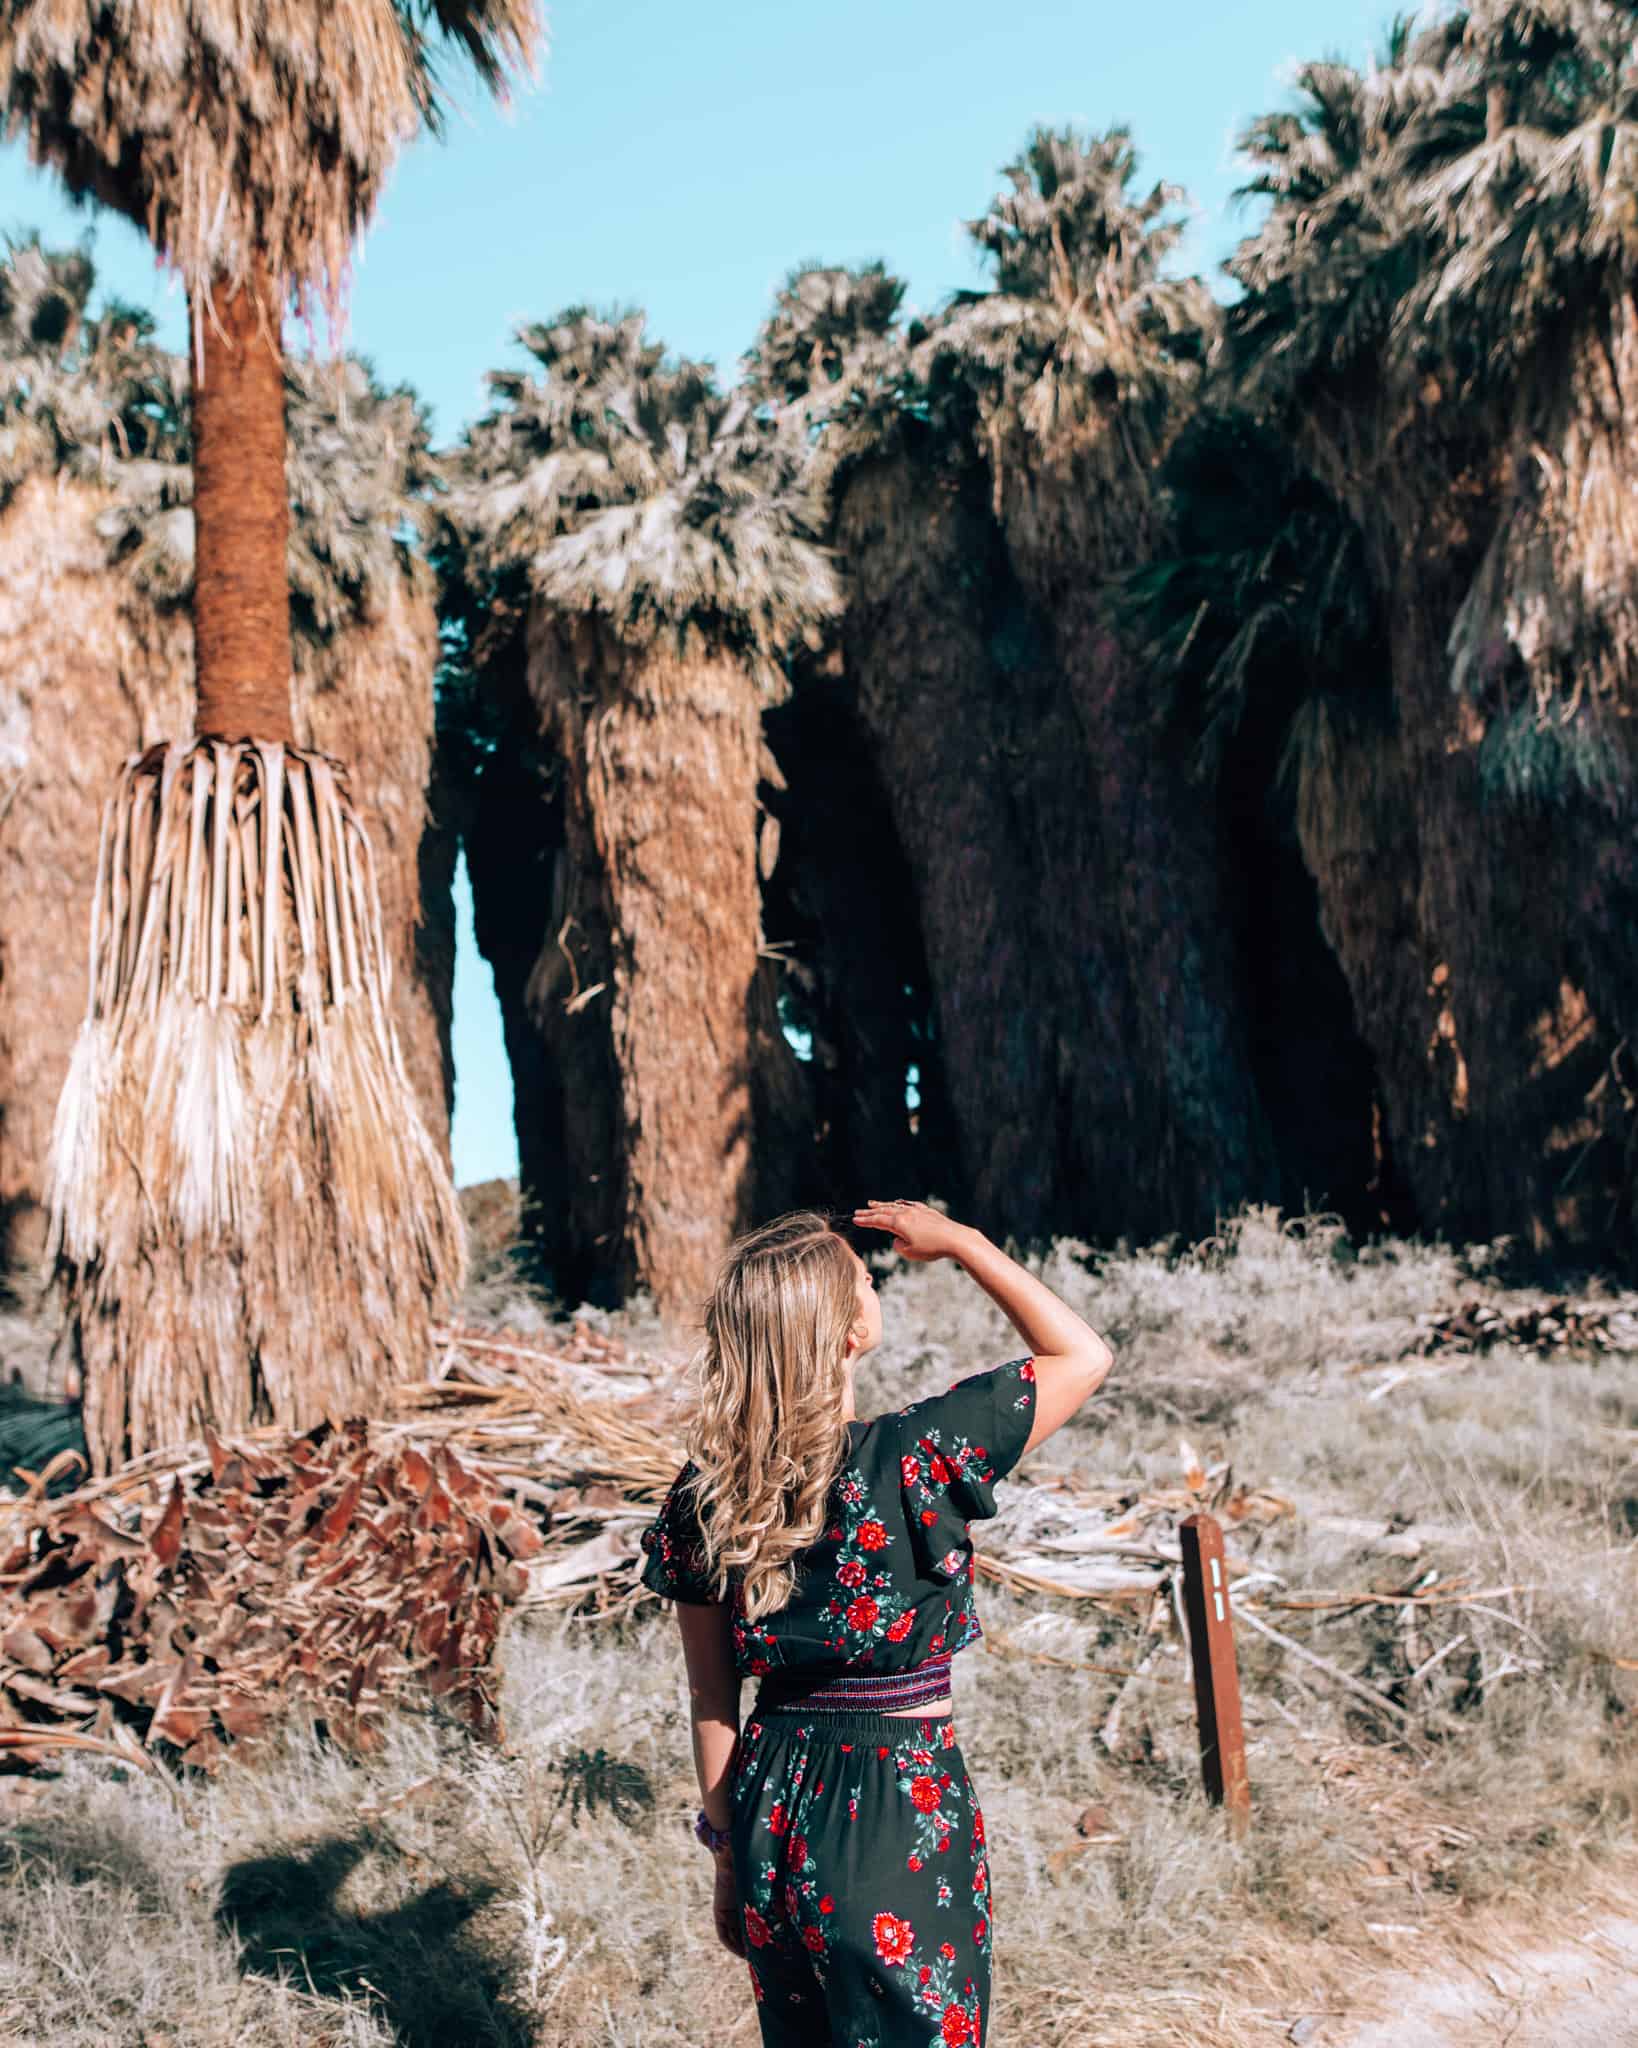 girl standing with hand at head looking at palm trees